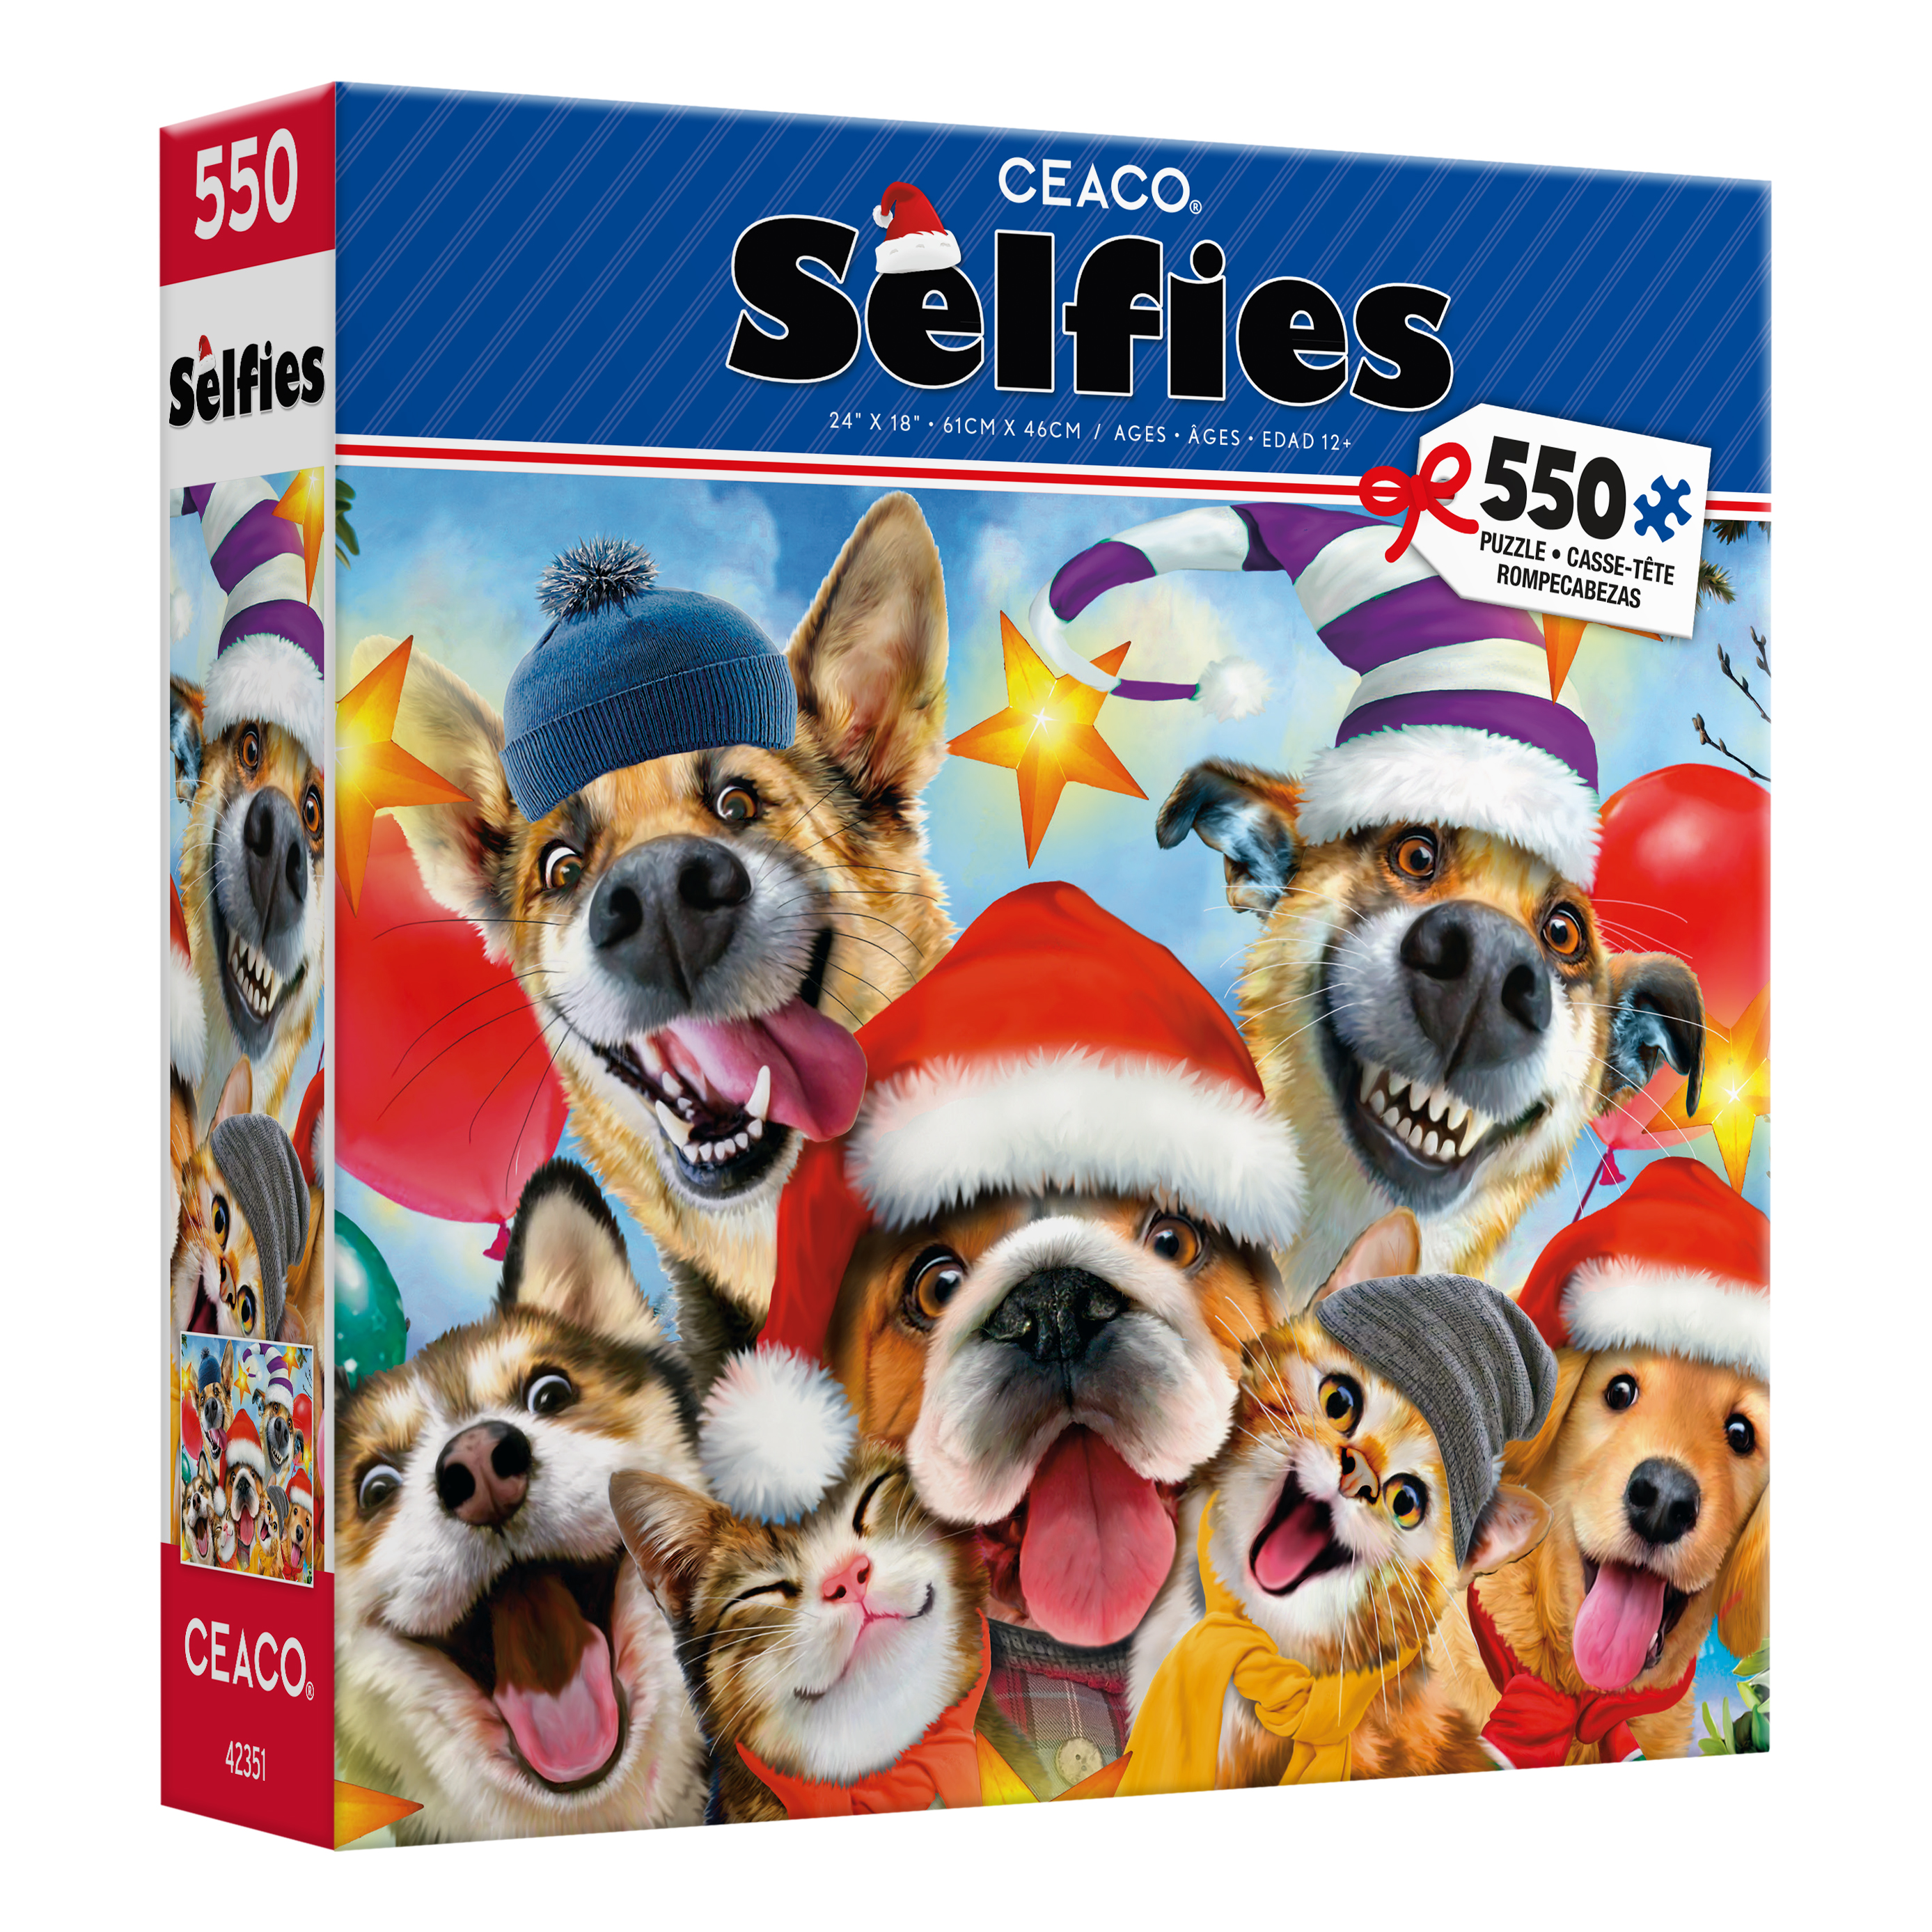 Cats and Dogs Selfies Christmas